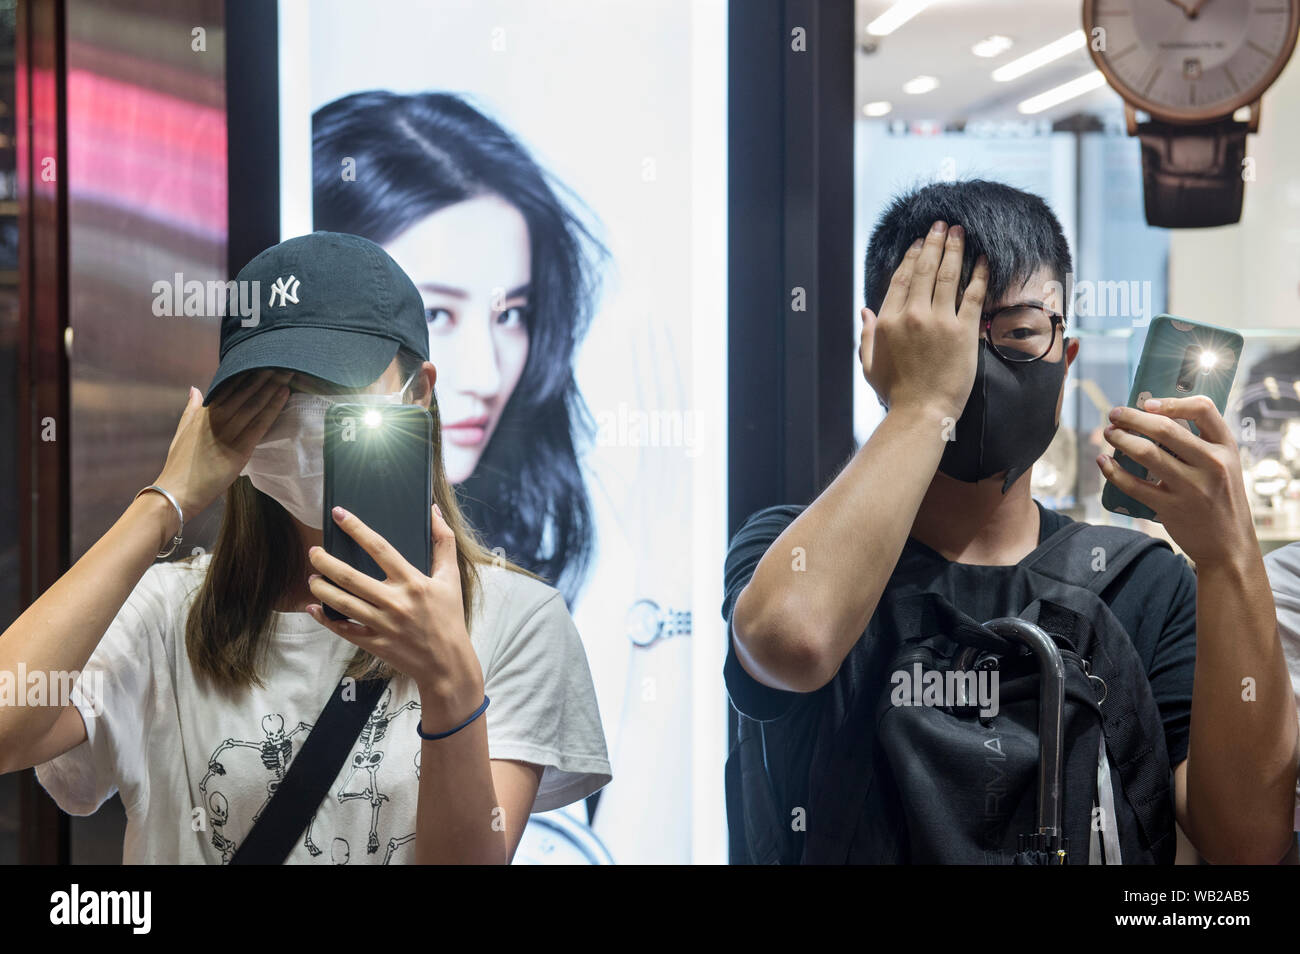 Protesters cover their right eye in front of a Chinese actress Liu Yifei commercial advert during the Hong Kong Way anti-government rally across Kowloon in Hong Kong. Mass demonstrations continue one more weekend in Hong Kong which began in June 2019 over a now-suspended extradition bill to China. Stock Photo